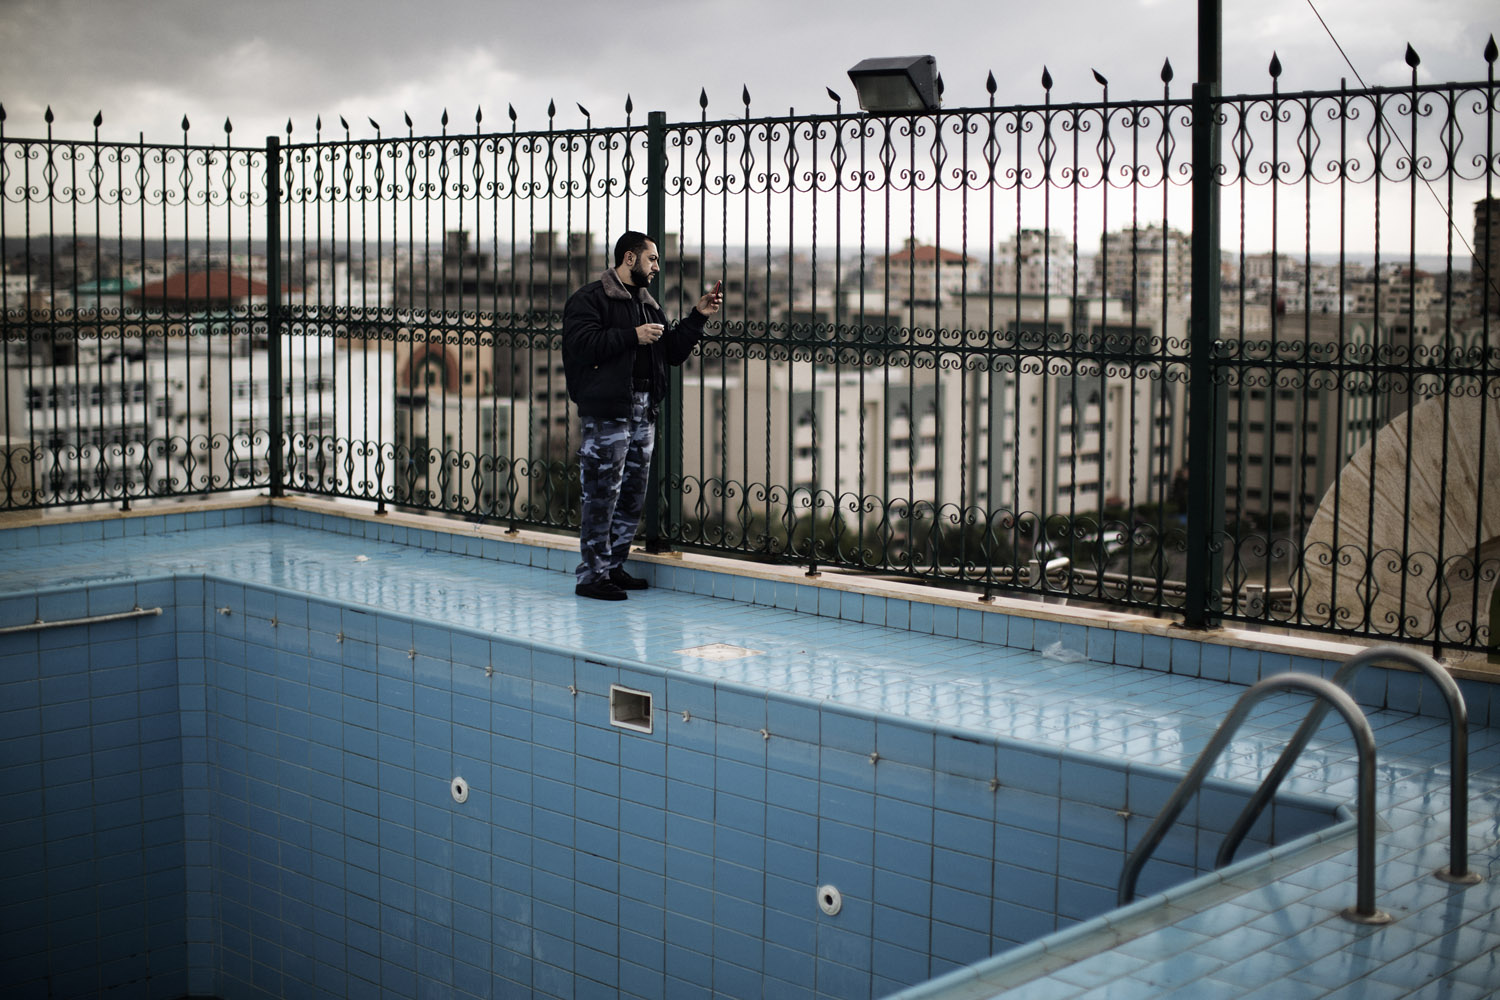 Dec. 8, 2012. A Palestinian Hamas policeman takes pictures with his phone from the rooftop of a building overlooking a rally in Gaza City. More than 100,000 Palestinians gathered for the rally, which marked the 25th anniversary of Hamas.